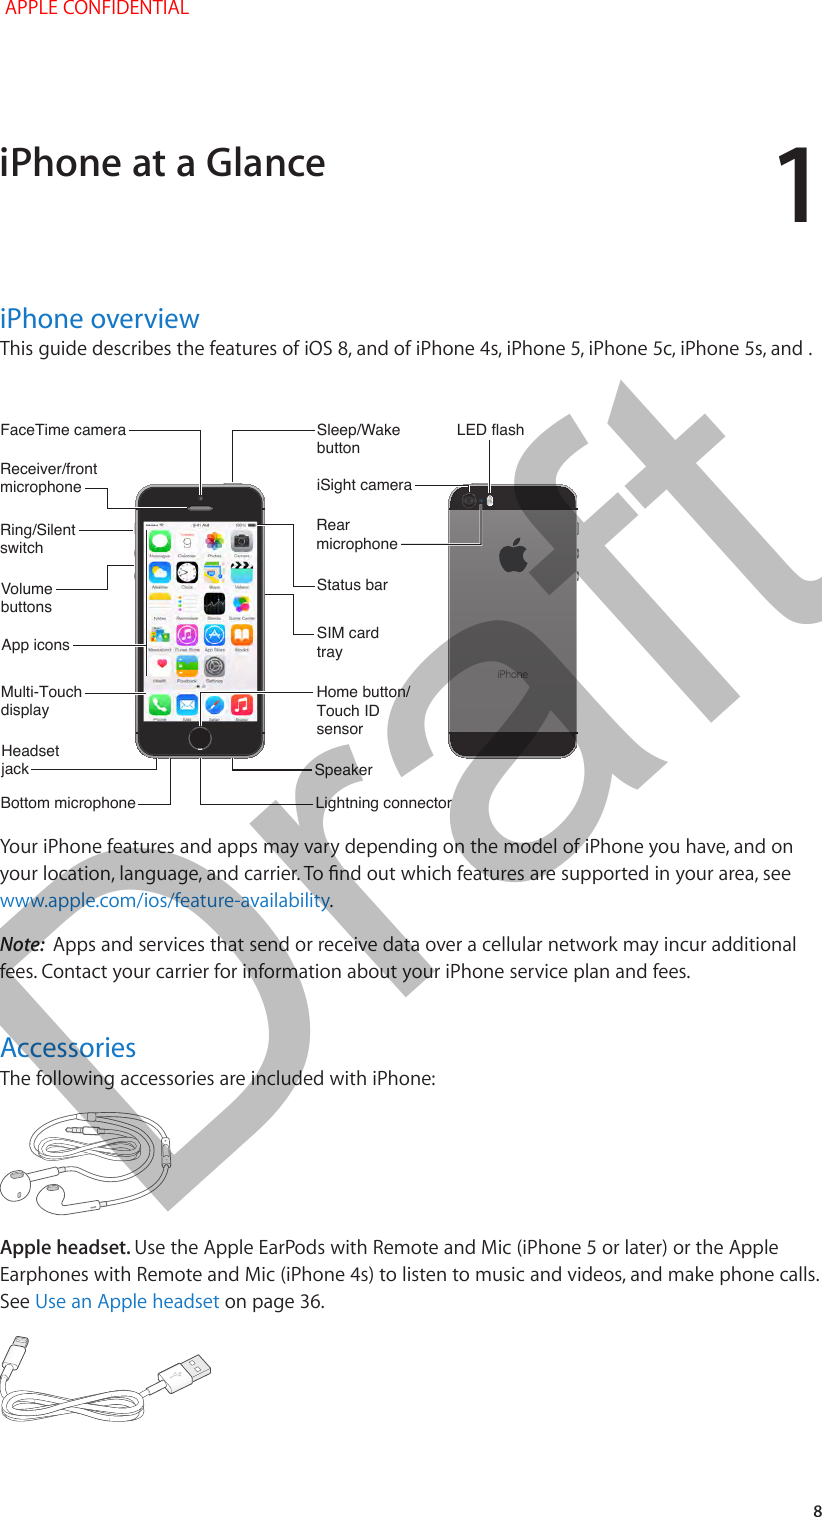 1   8iPhone overviewThis guide describes the features of iOS 8, and of iPhone 4s, iPhone 5, iPhone 5c, iPhone 5s, and . Receiver/frontmicrophoneReceiver/frontmicrophoneBottom microphoneBottom microphoneRing/SilentswitchRing/SilentswitchFaceTime cameraFaceTime cameraVolumebuttonsVolumebuttonsMulti-TouchdisplayMulti-TouchdisplayHomebutton/Touch IDsensorHomebutton/Touch IDsensorHeadsetjackHeadsetjackSleep/WakebuttonSleep/WakebuttonRearmicrophoneRearmicrophoneSIM cardtraySIM cardtrayLED flashLED flashiSight cameraiSight cameraApp iconsApp iconsStatusbarStatusbarLightning connectorLightning connectorSpeakerSpeakerYour iPhone features and apps may vary depending on the model of iPhone you have, and on www.apple.com/ios/feature-availability.Note:  Apps and services that send or receive data over a cellular network may incur additional fees. Contact your carrier for information about your iPhone service plan and fees.AccessoriesThe following accessories are included with iPhone:Apple headset. Use the Apple EarPods with Remote and Mic (iPhone 5 or later) or the Apple Earphones with Remote and Mic (iPhone 4s) to listen to music and videos, and make phone calls. See Use an Apple headset on page 36.iPhone at a Glance APPLE CONFIDENTIALDraft